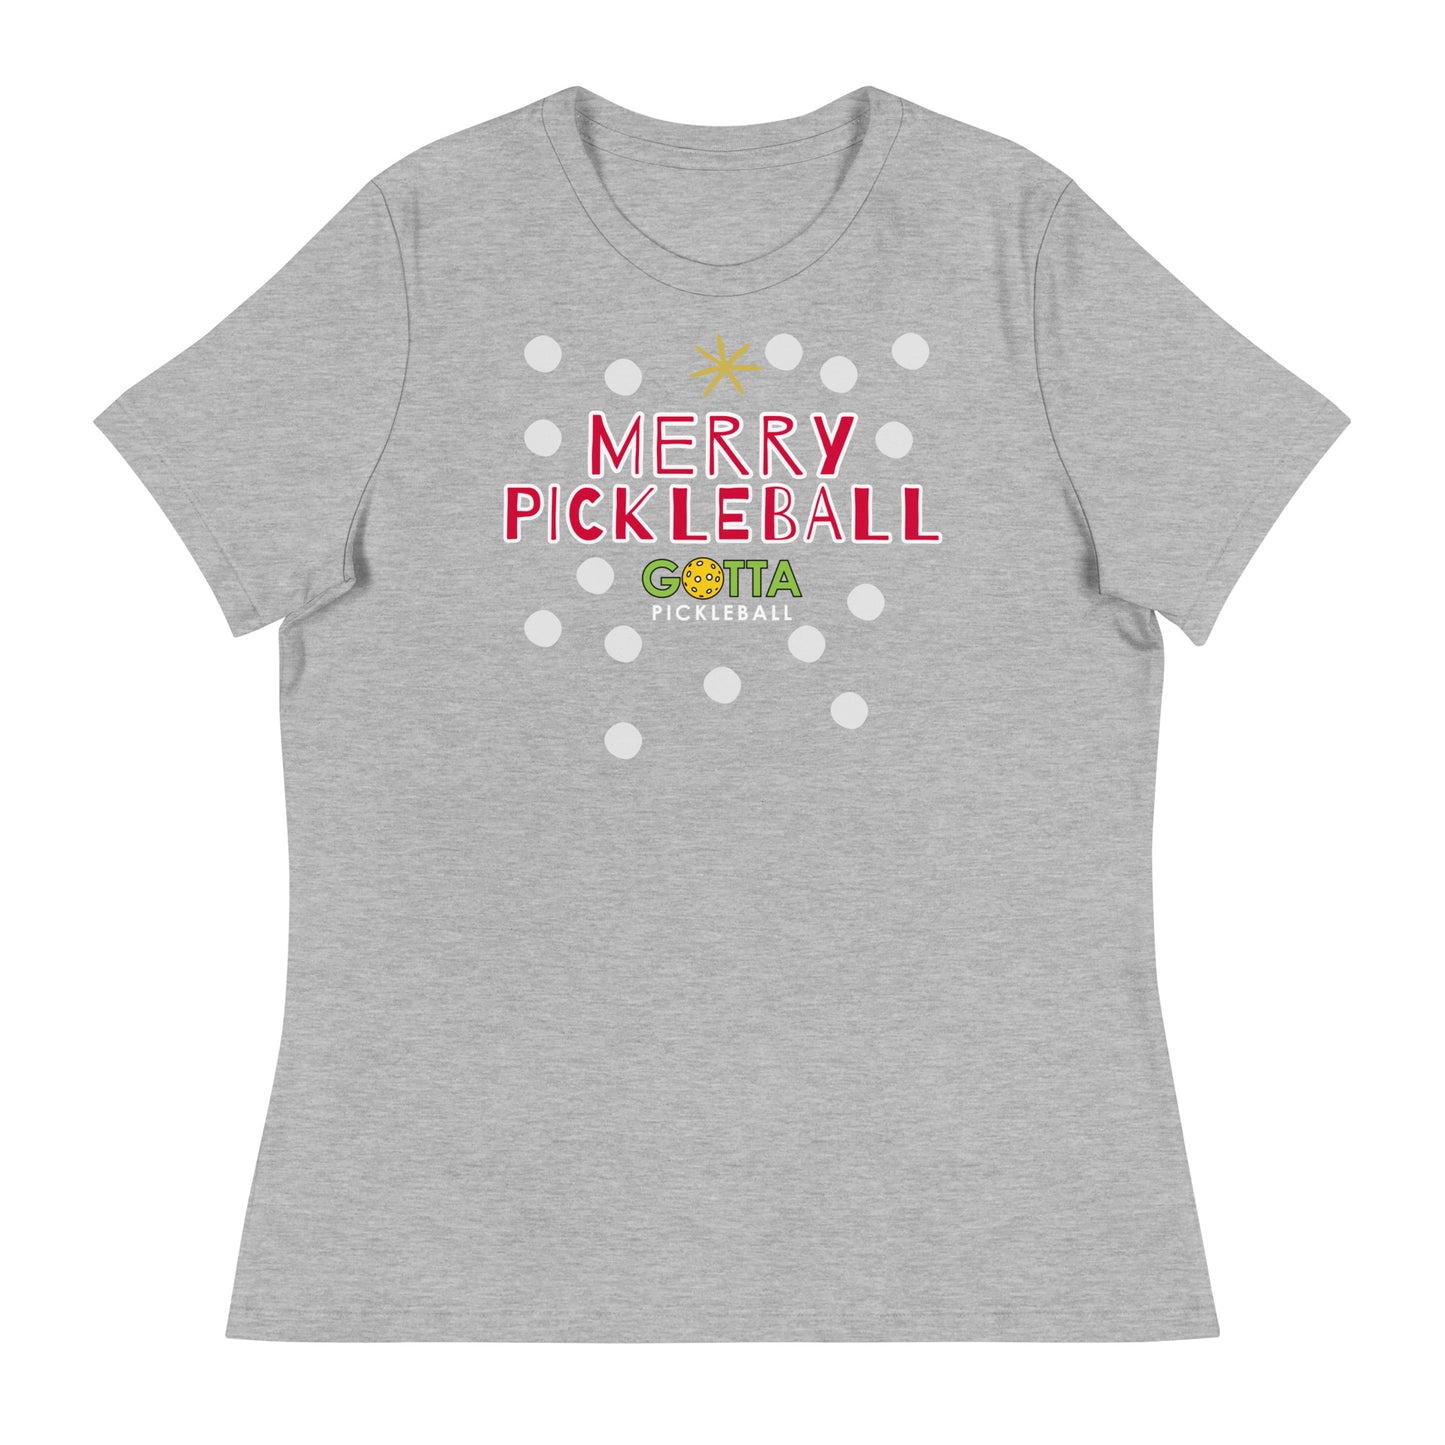 Women's T-Shirt Relaxed: Merry Pickleball Snow (more colors)